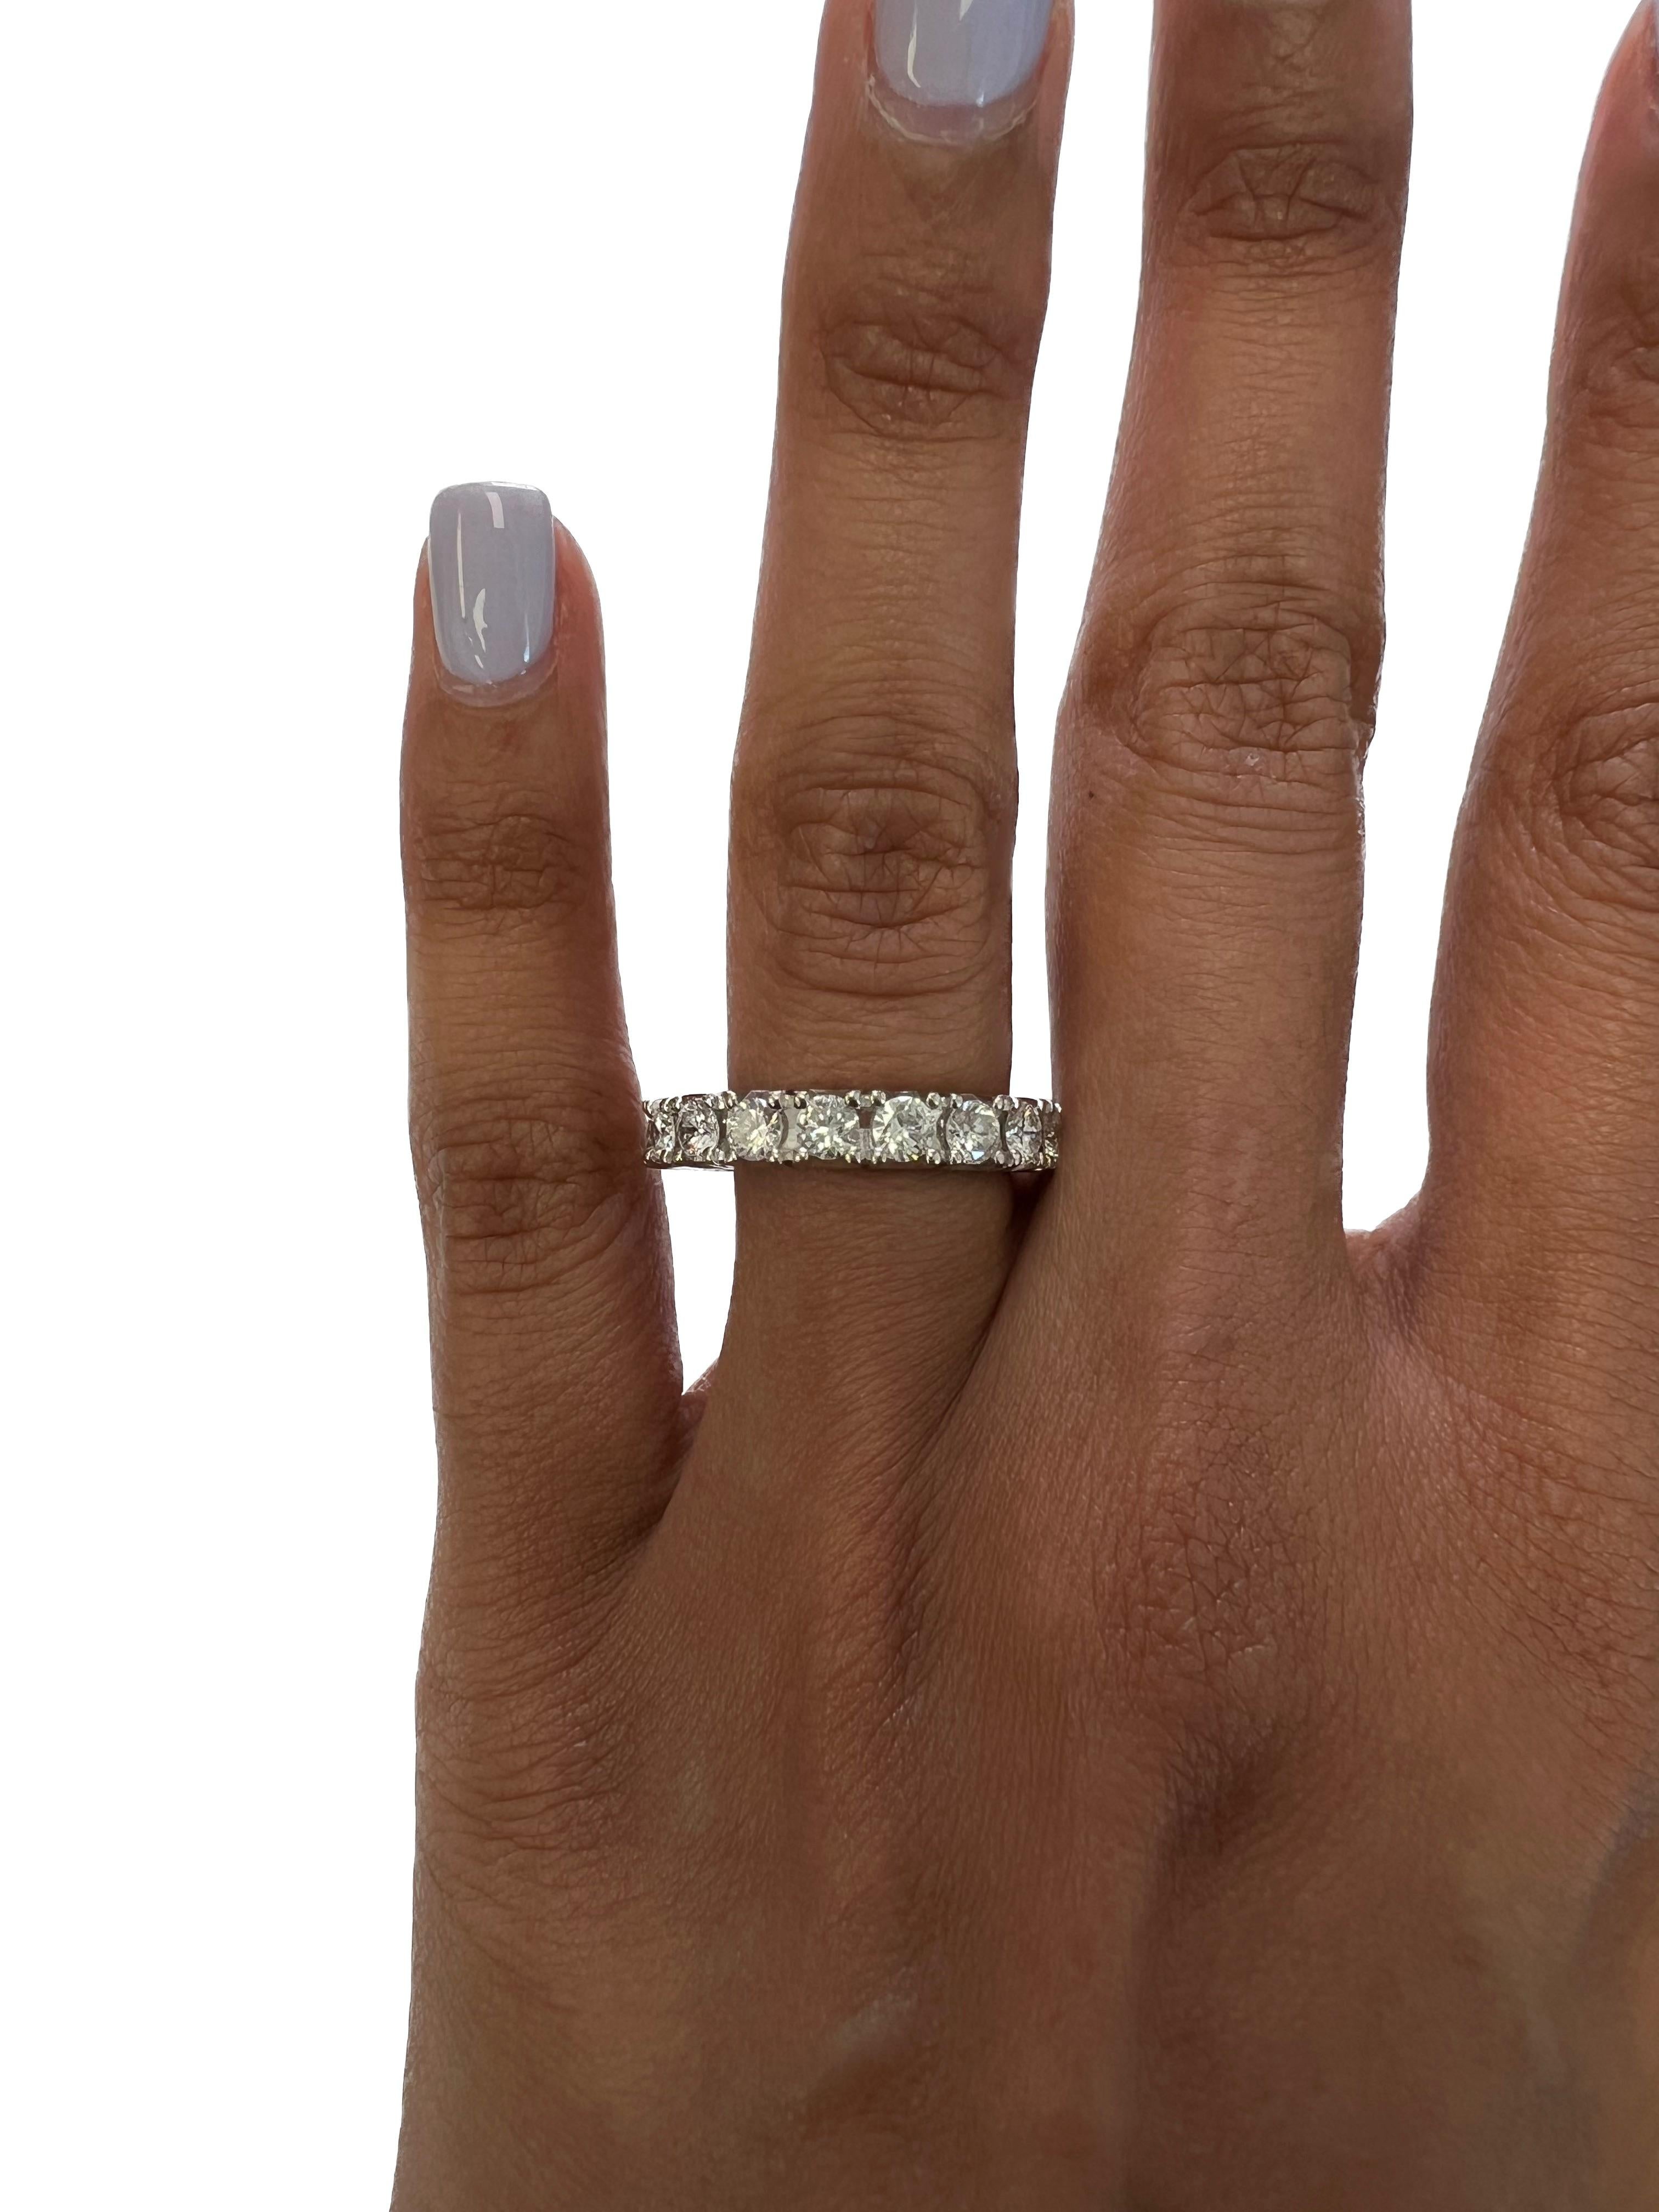 18k White Gold 2cttw Diamond Eternity Band For Sale 3